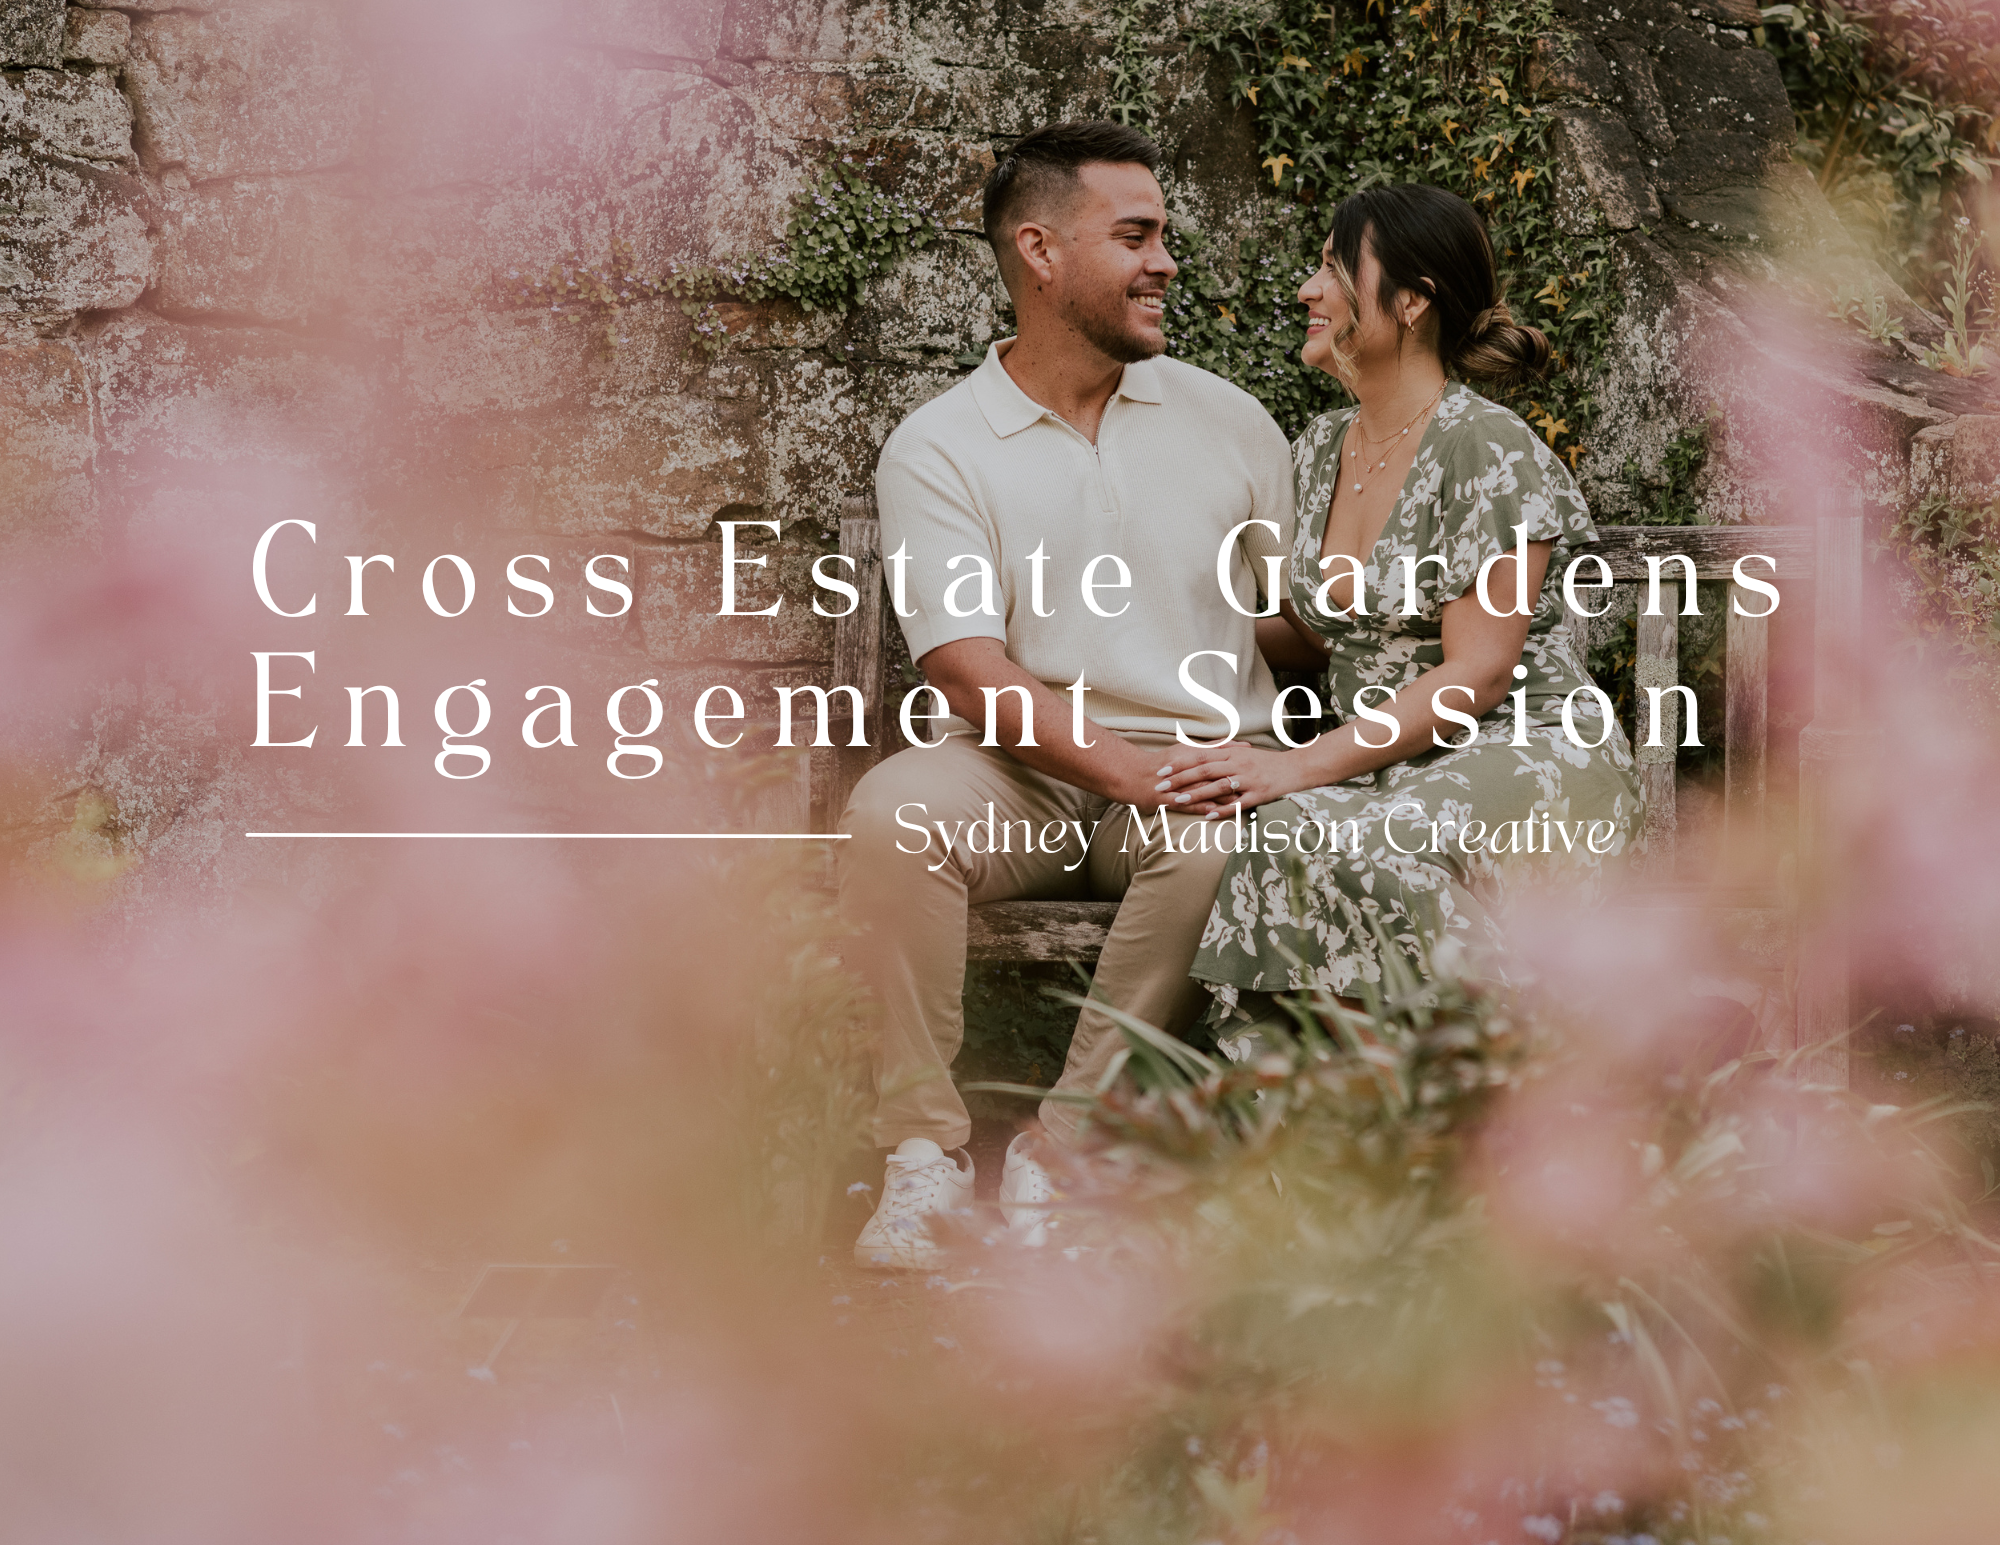 Cross Estate Gardens Engagement Session by Sydney Madison